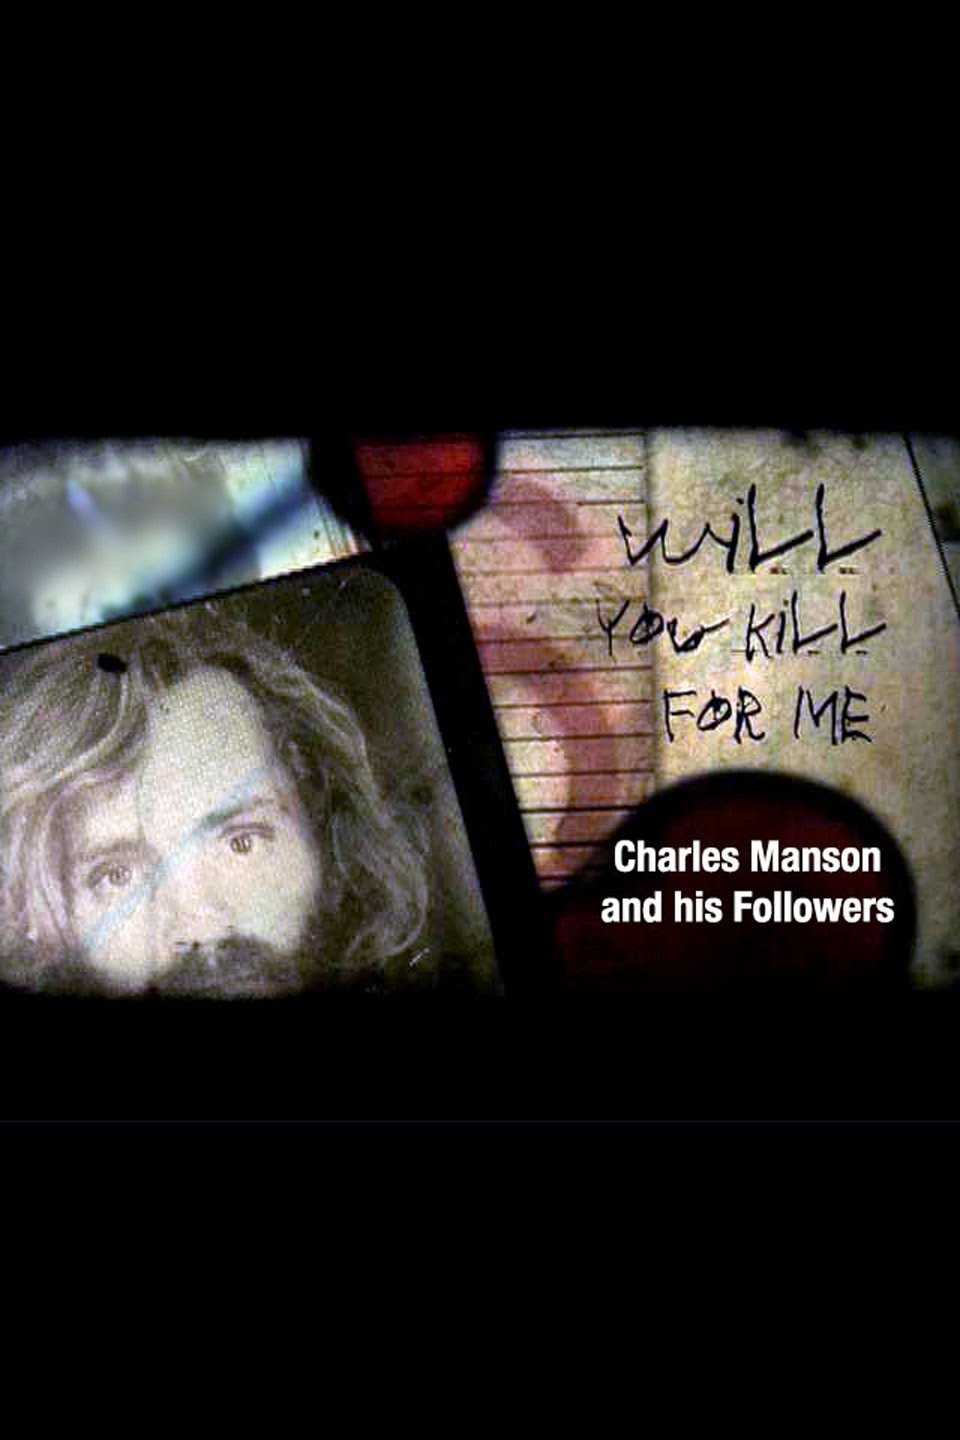 Will You Kill for Me? Charles Manson and His Followers (2008) Screenshot 1